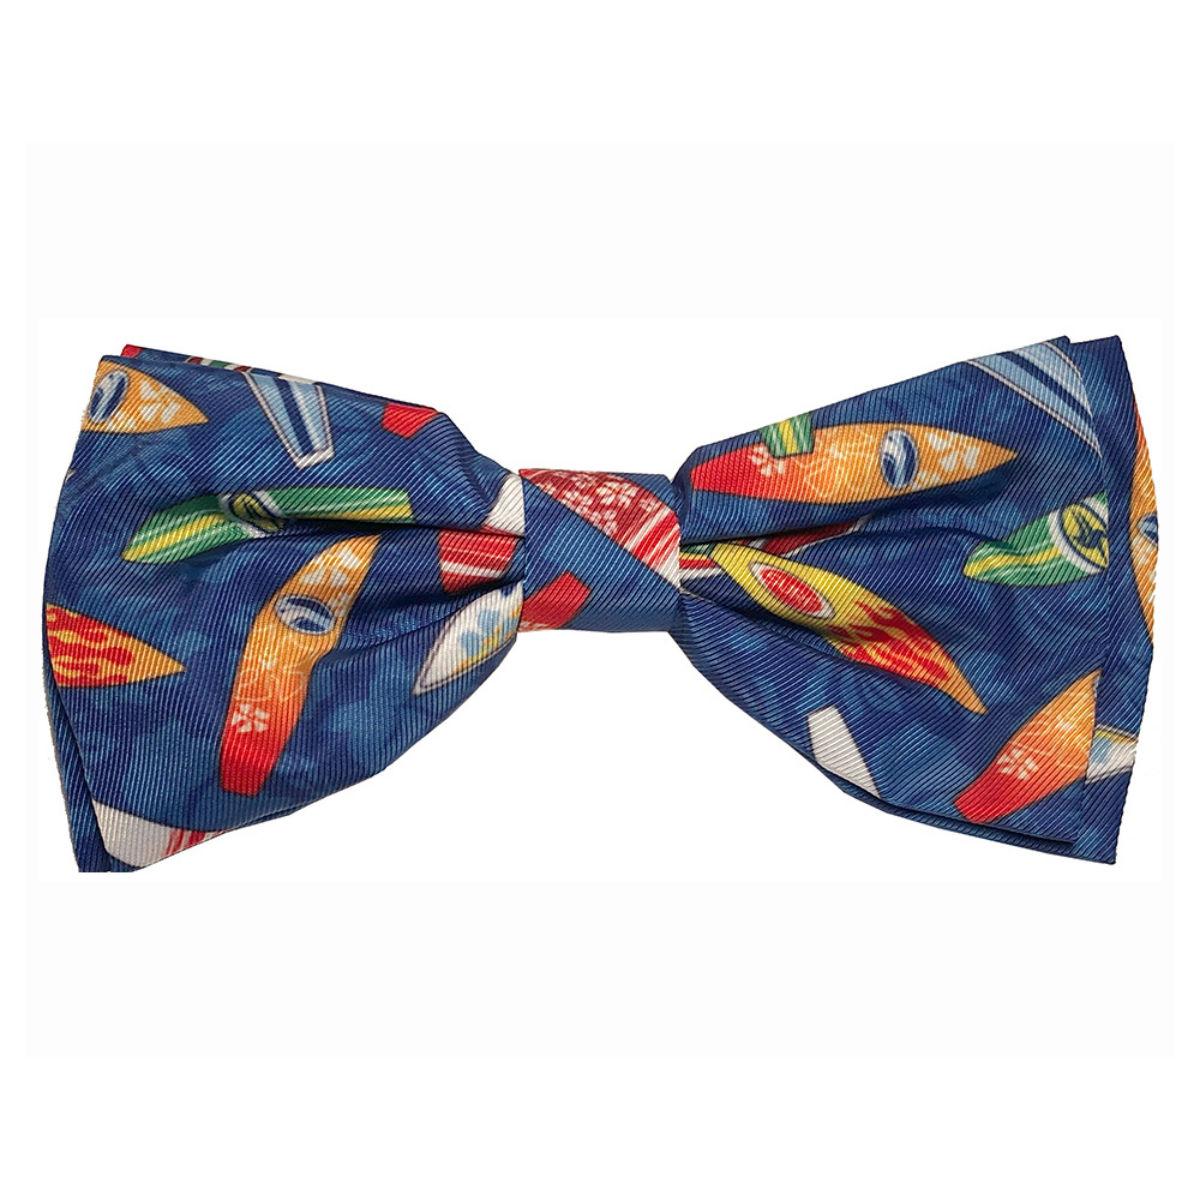 Huxley & Kent Dog and Cat Bow Tie Collar Attachment - Surfer Pup